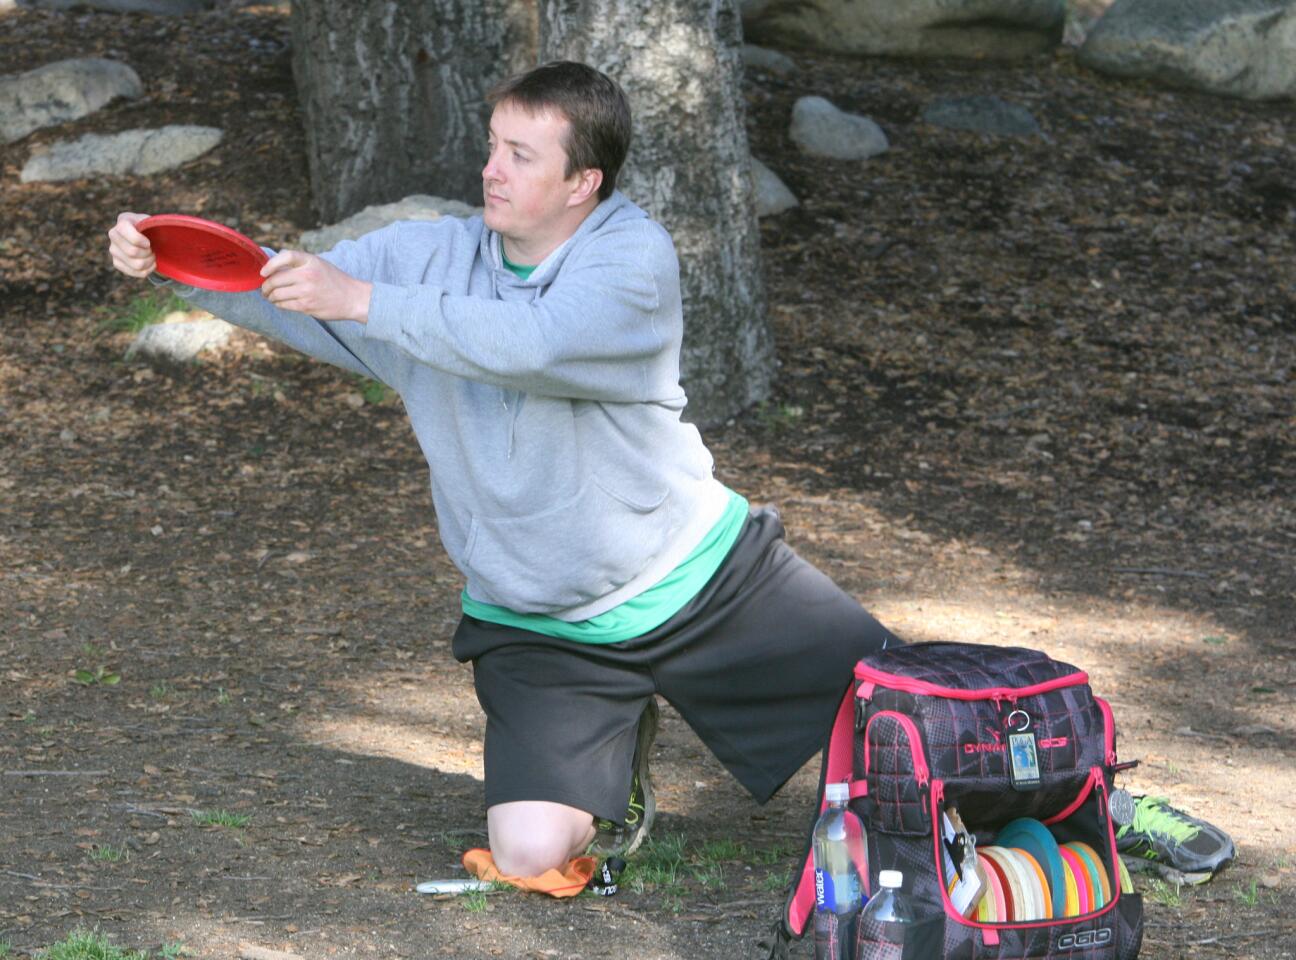 Photo Gallery: 38th Annual Professional Disc Golf Assn. Wintertime Open